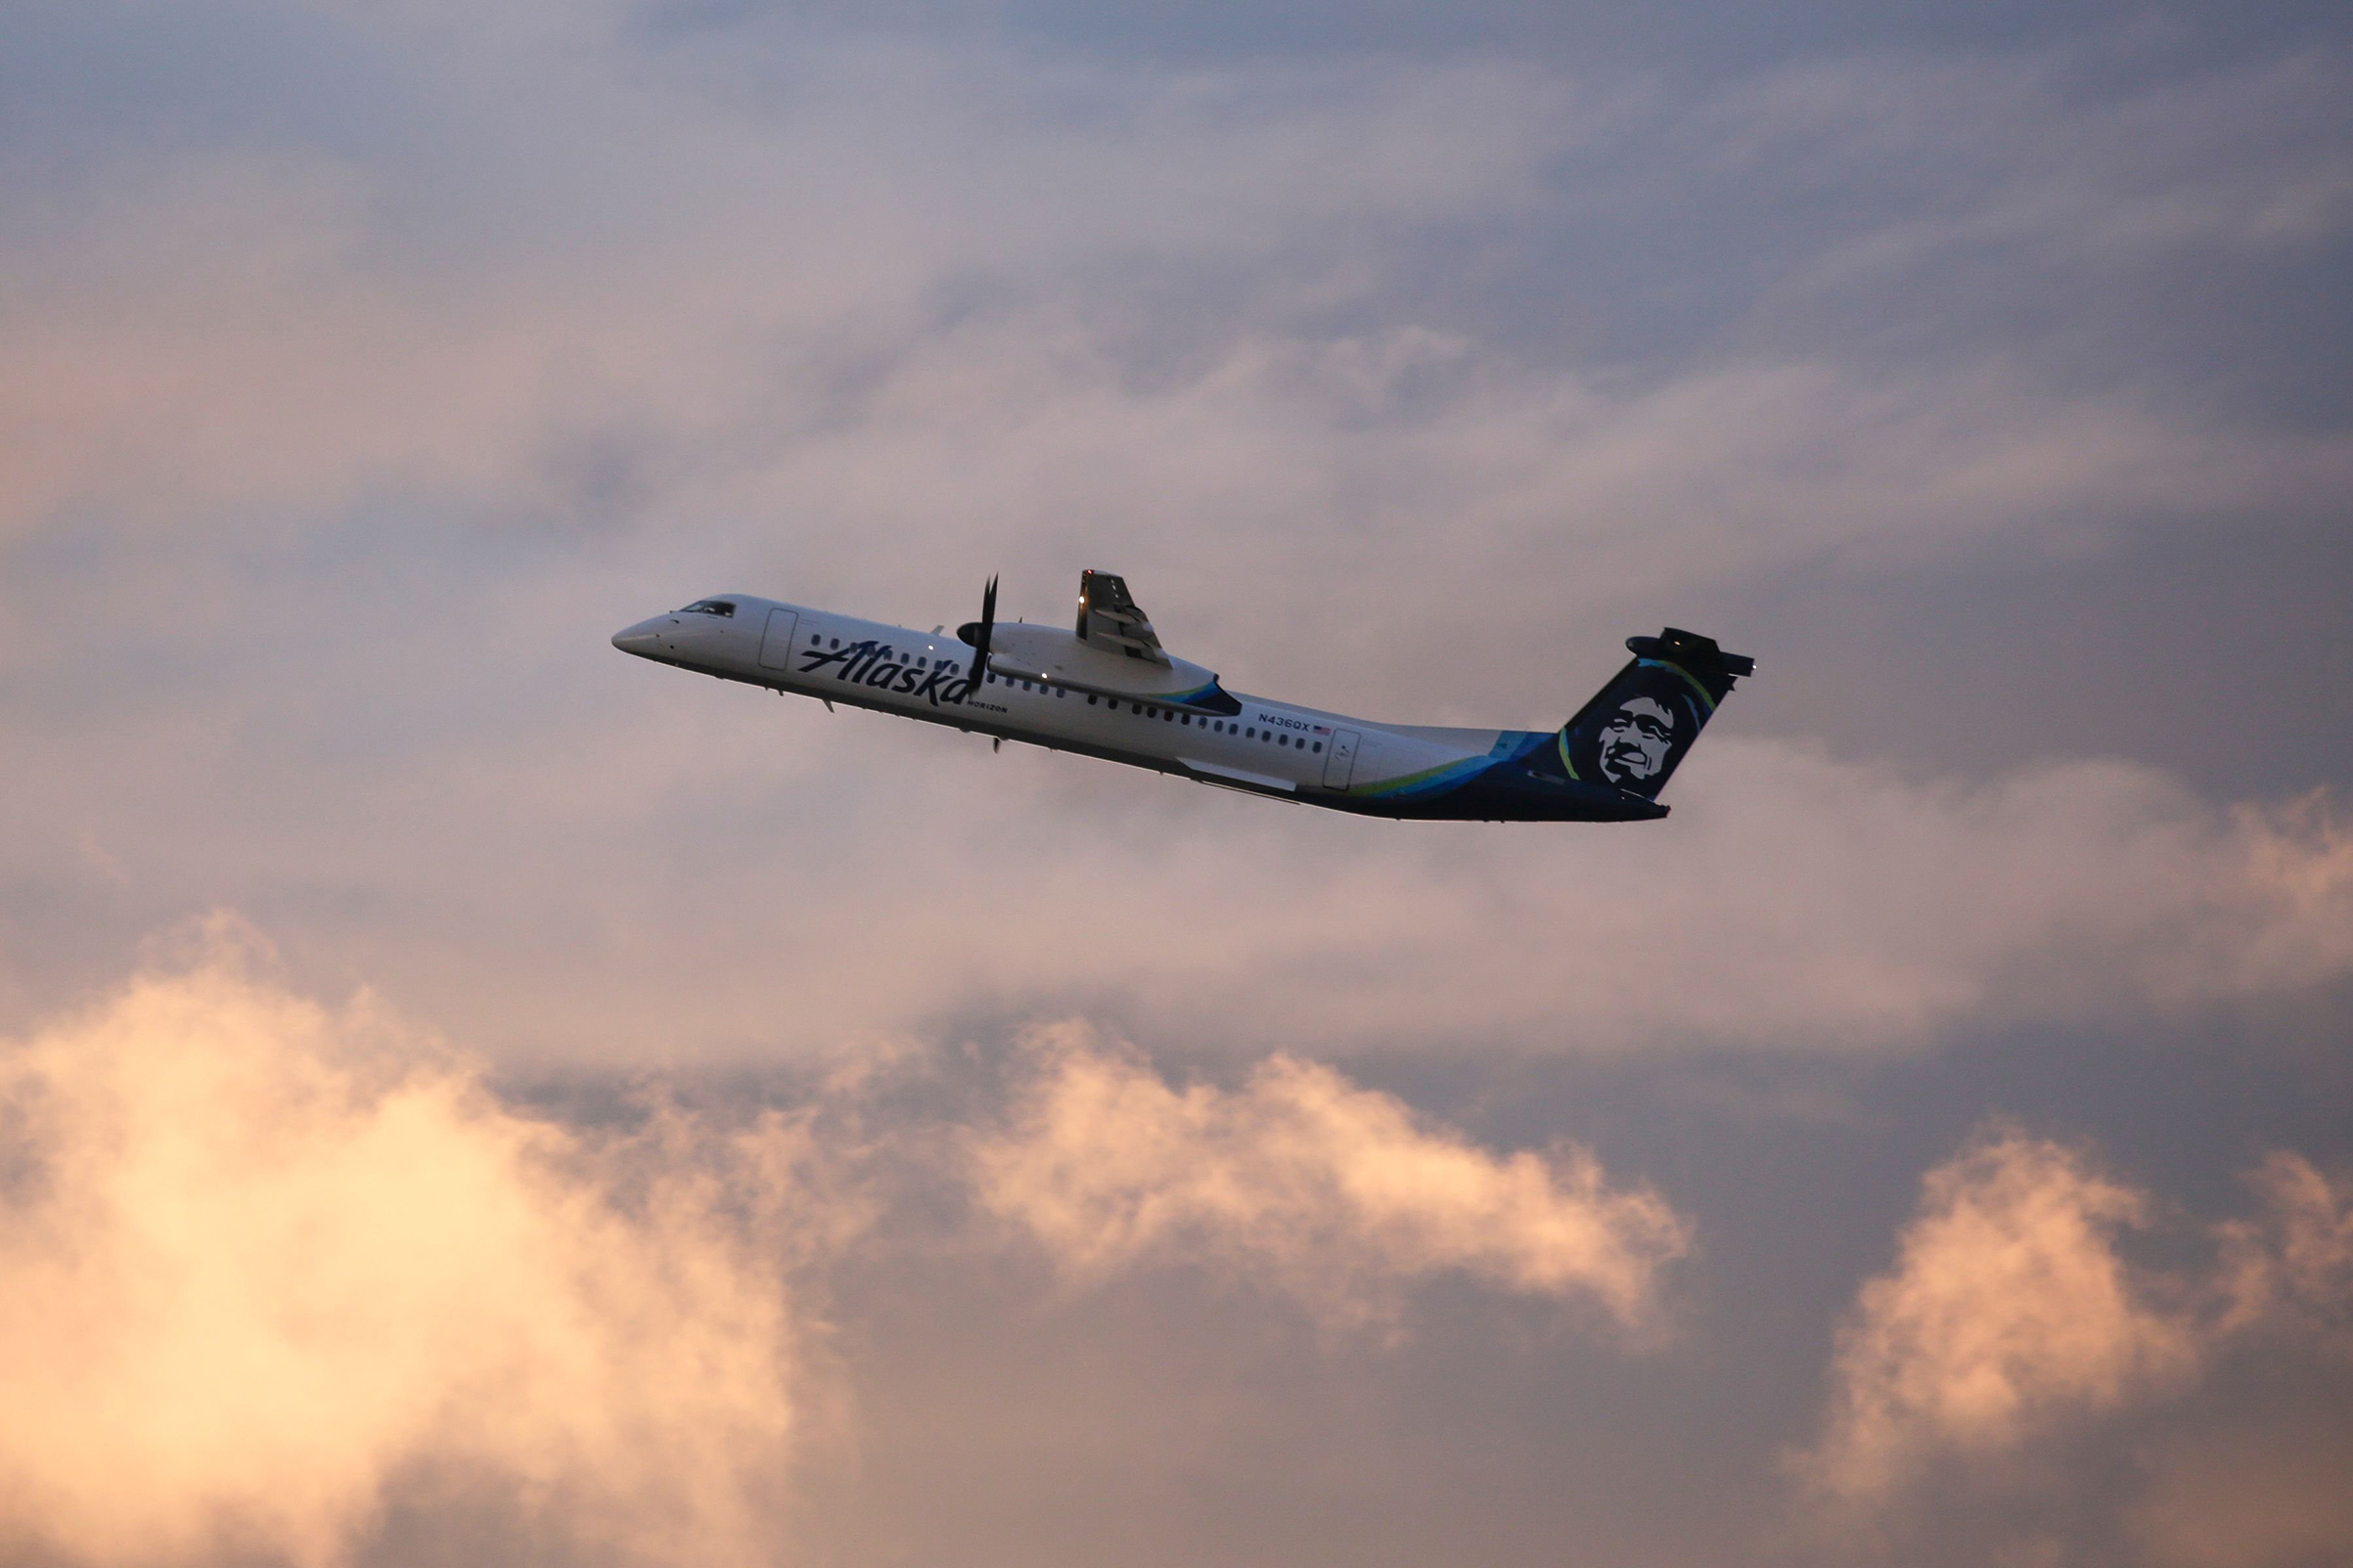 An Alaska Airlines Bombardier Dash 8 Q400 operated by Horizon Air takes off from at Seattle-Tacoma International Airport International Airport one day after Horizon Air ground crew member Richard Russell took a similar plane from the airport in Seattle, Washington on August 11, 2018. (Jason Redmond—AFP/Getty Images)